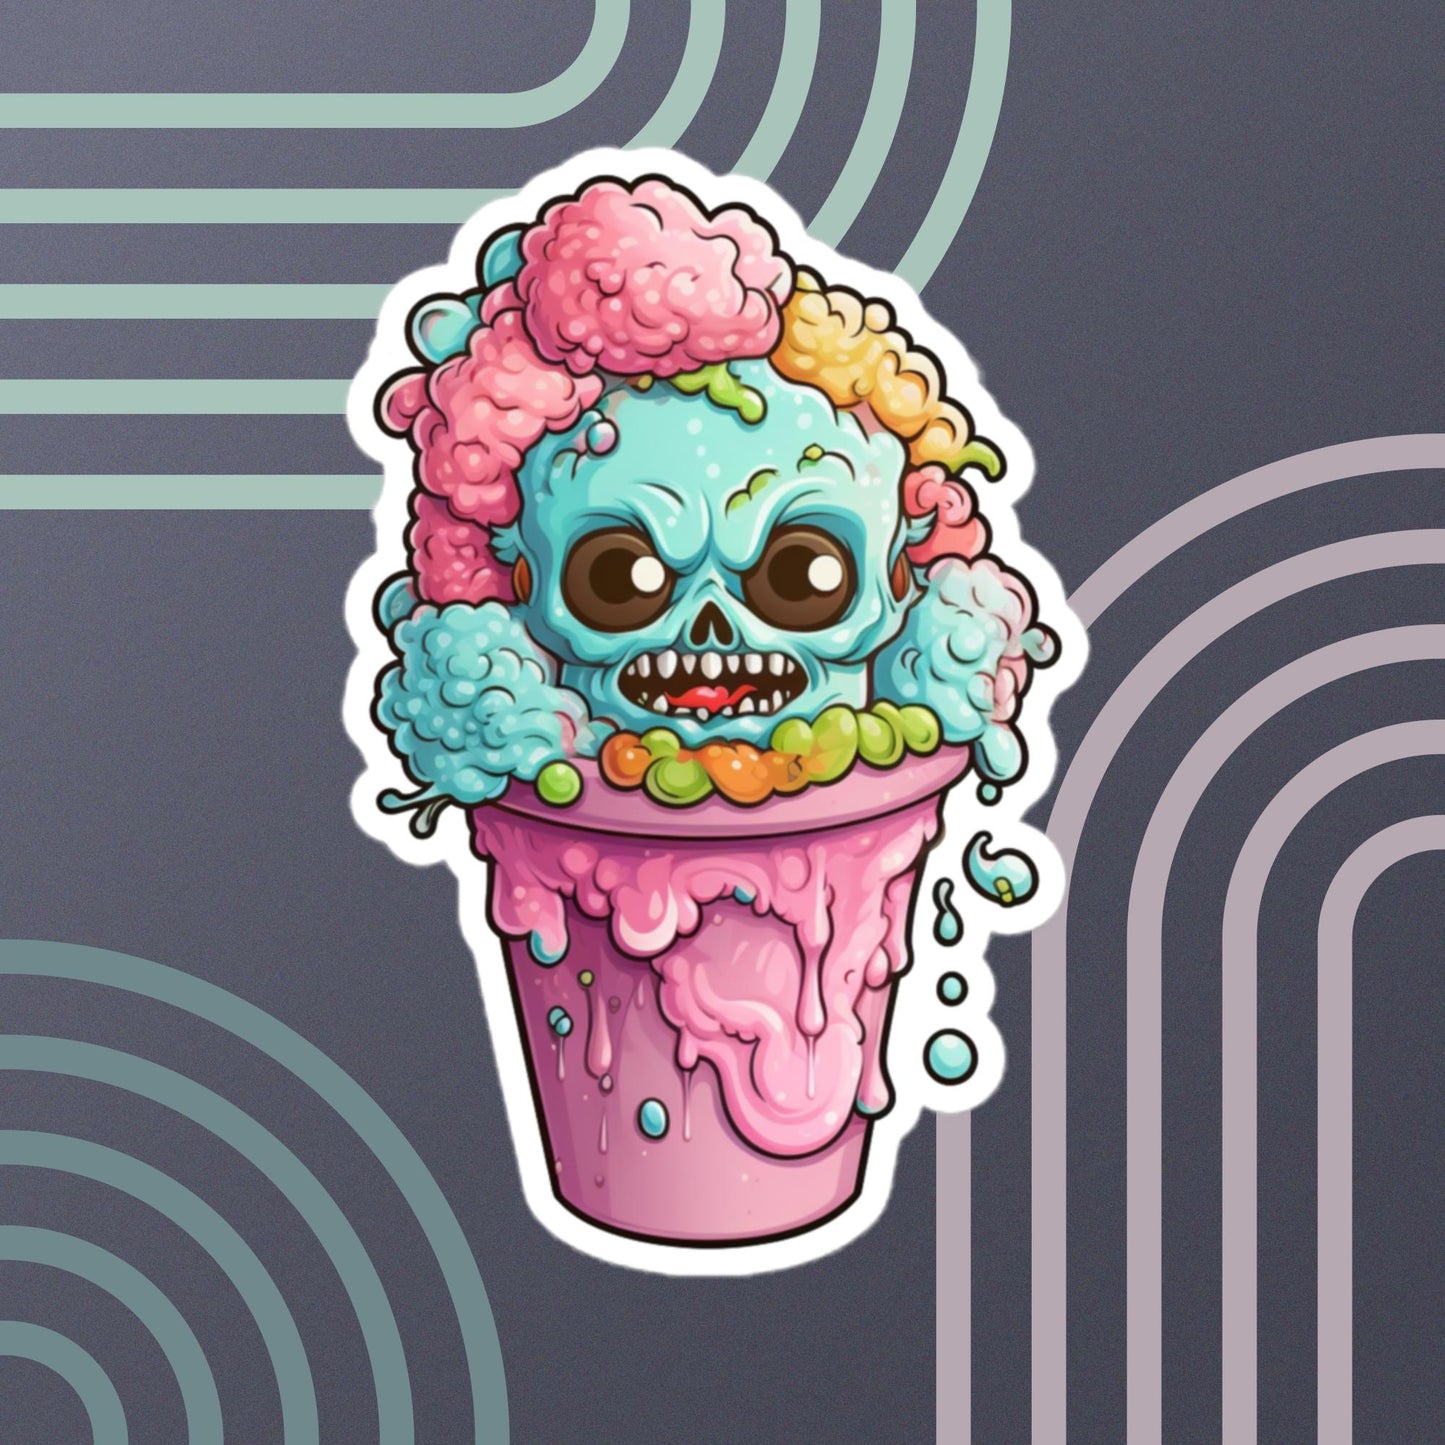 Zombie Cotton Candy!